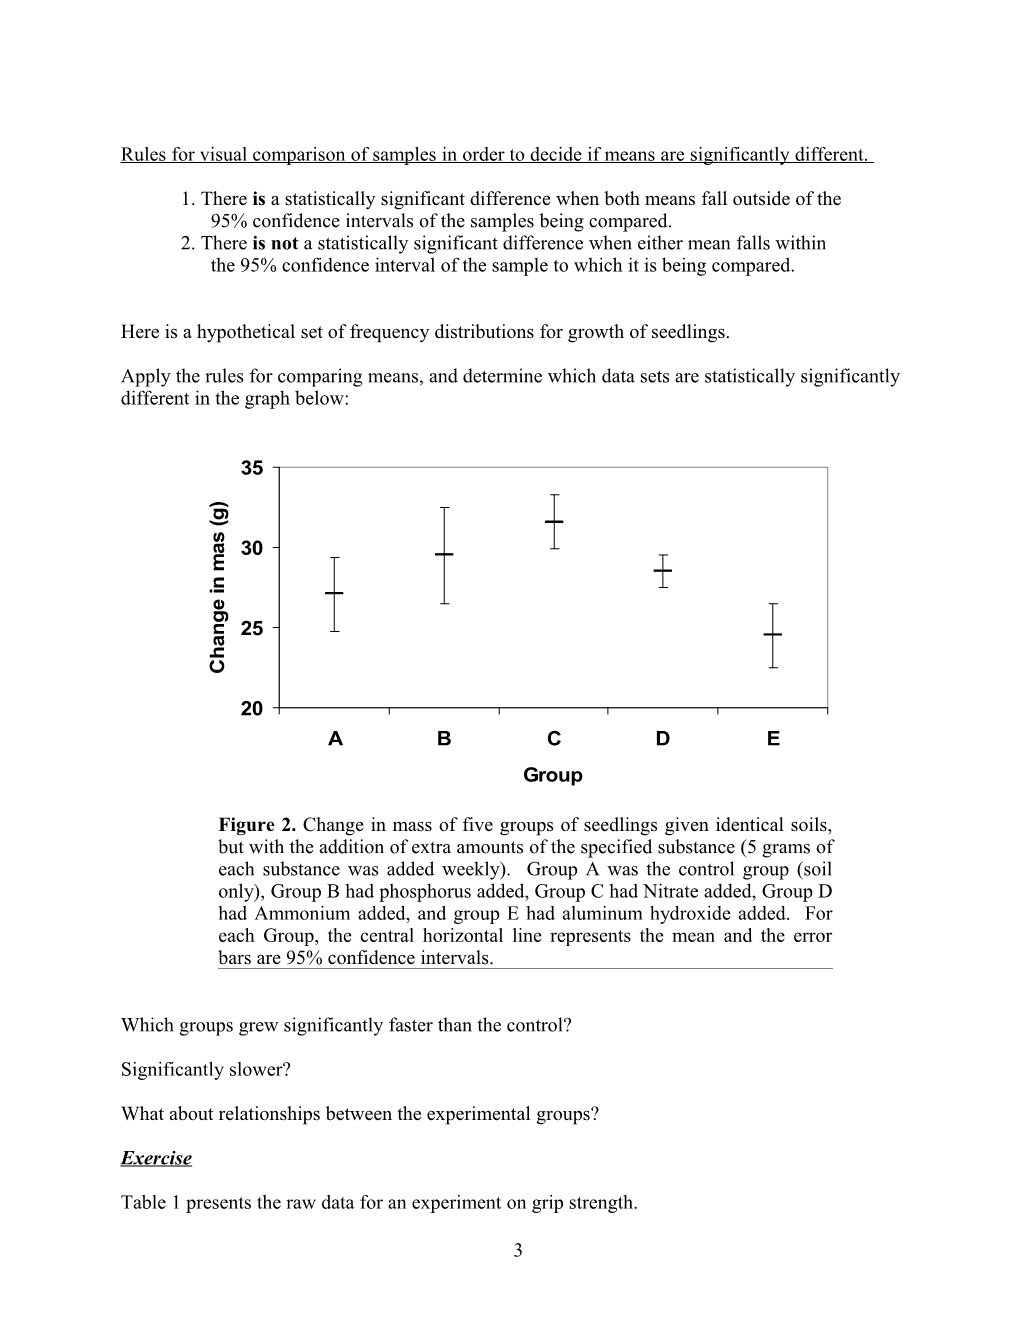 LAB EXERCISE: Statistical Analysis (Calculating 95% Confidence Intervals)